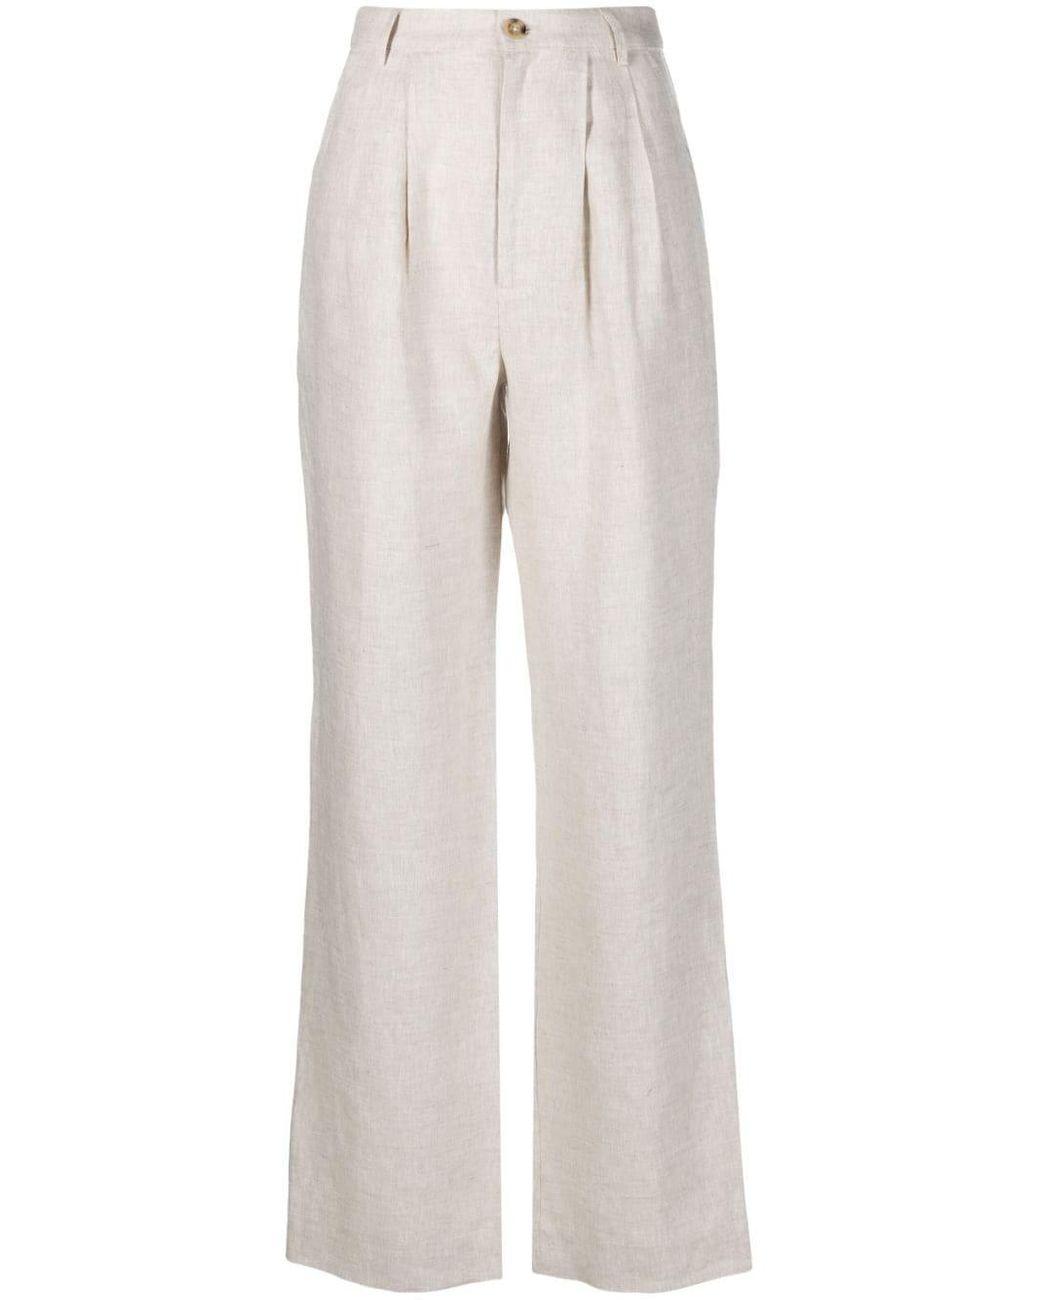 Reformation Mason Linen Trousers in White | Lyst